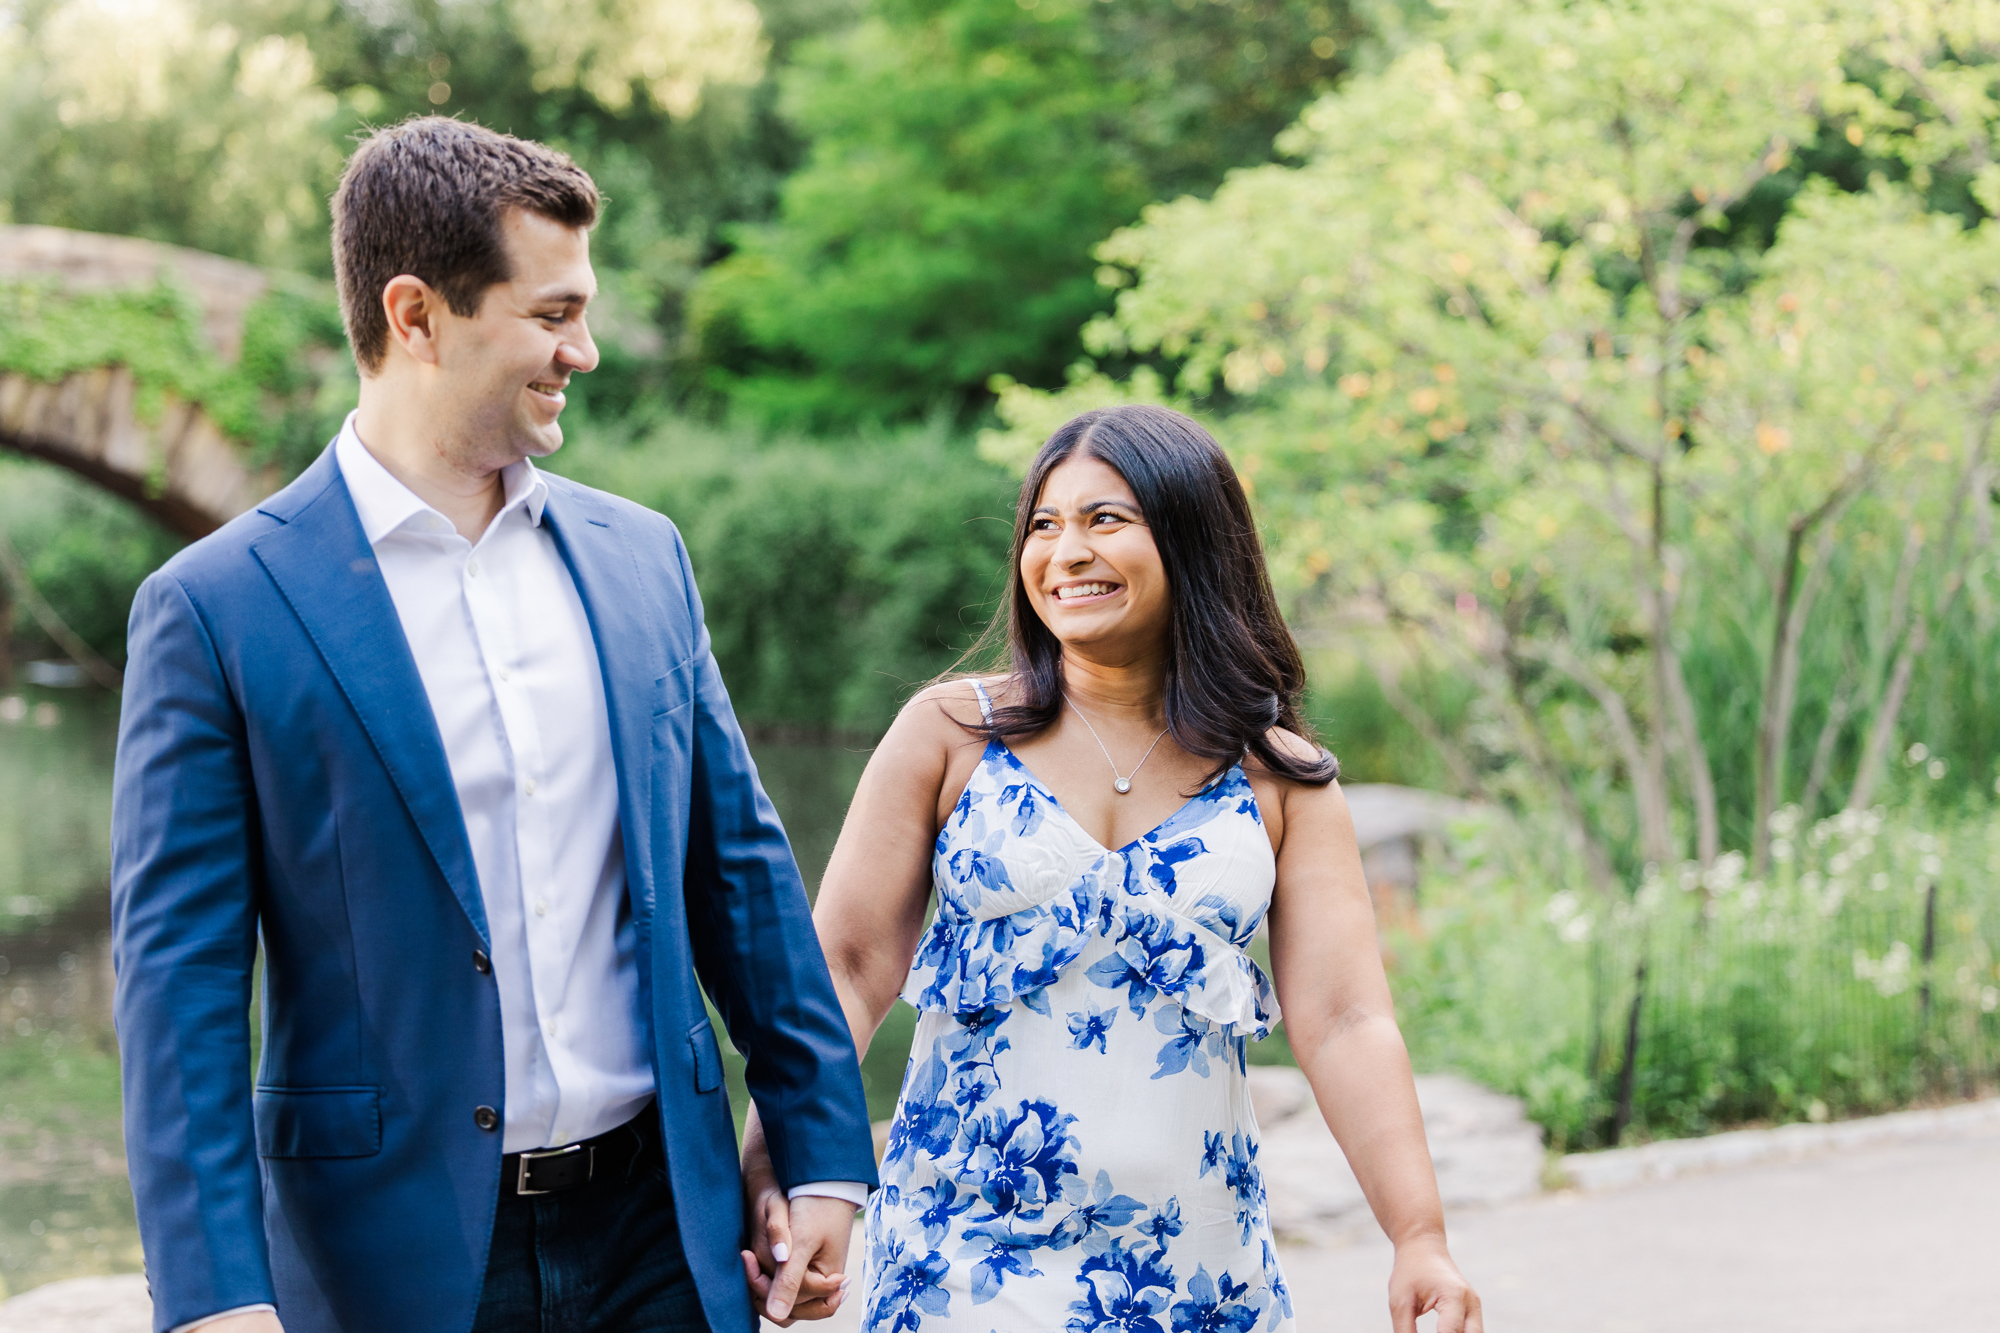 Radiant Central Park Engagement Photography